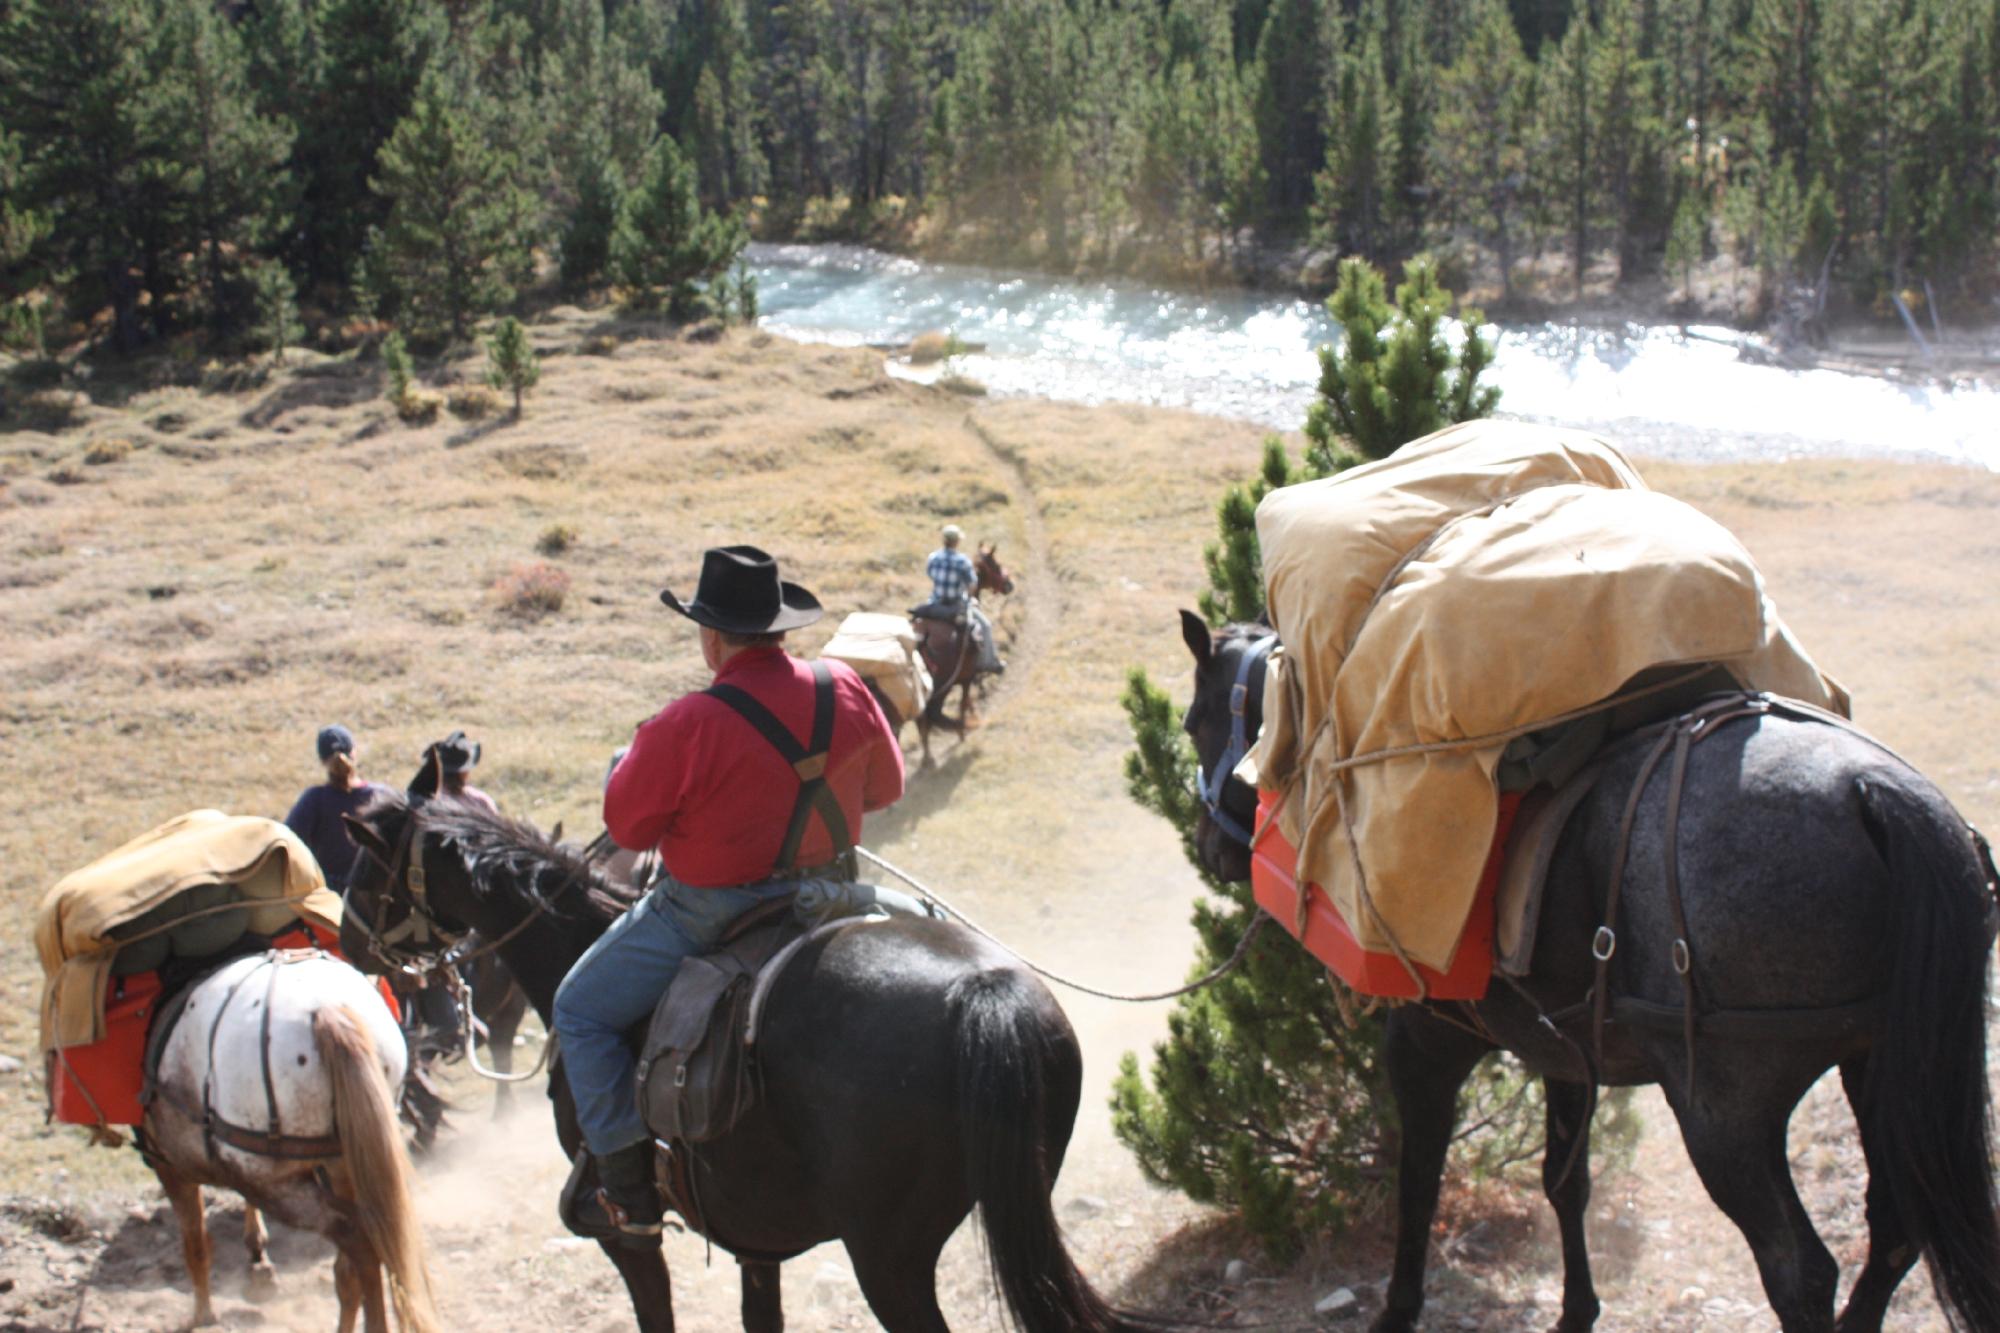 A group of riders on horses descend a trail towards a river. The horses are carrying large packs on their backs.